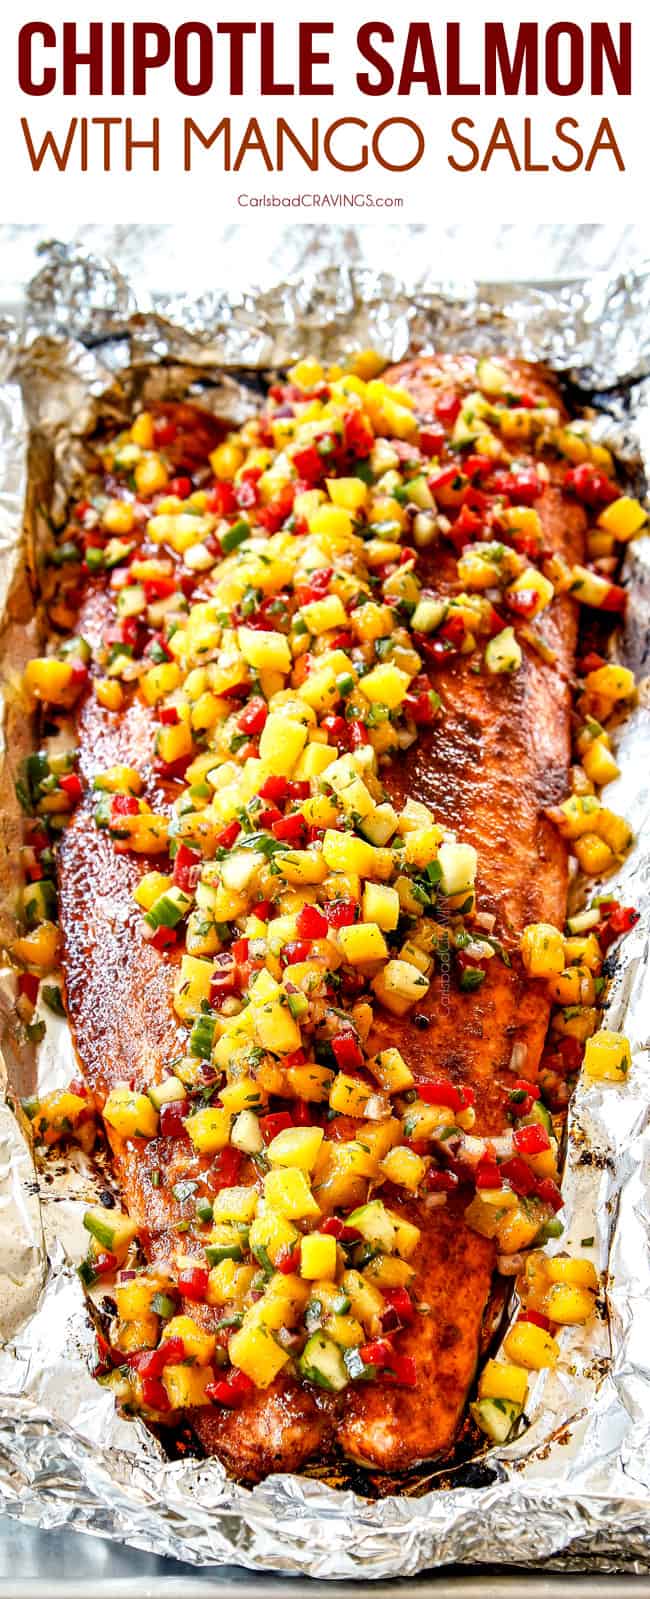 front view of a fillet of salmon with mango salsa